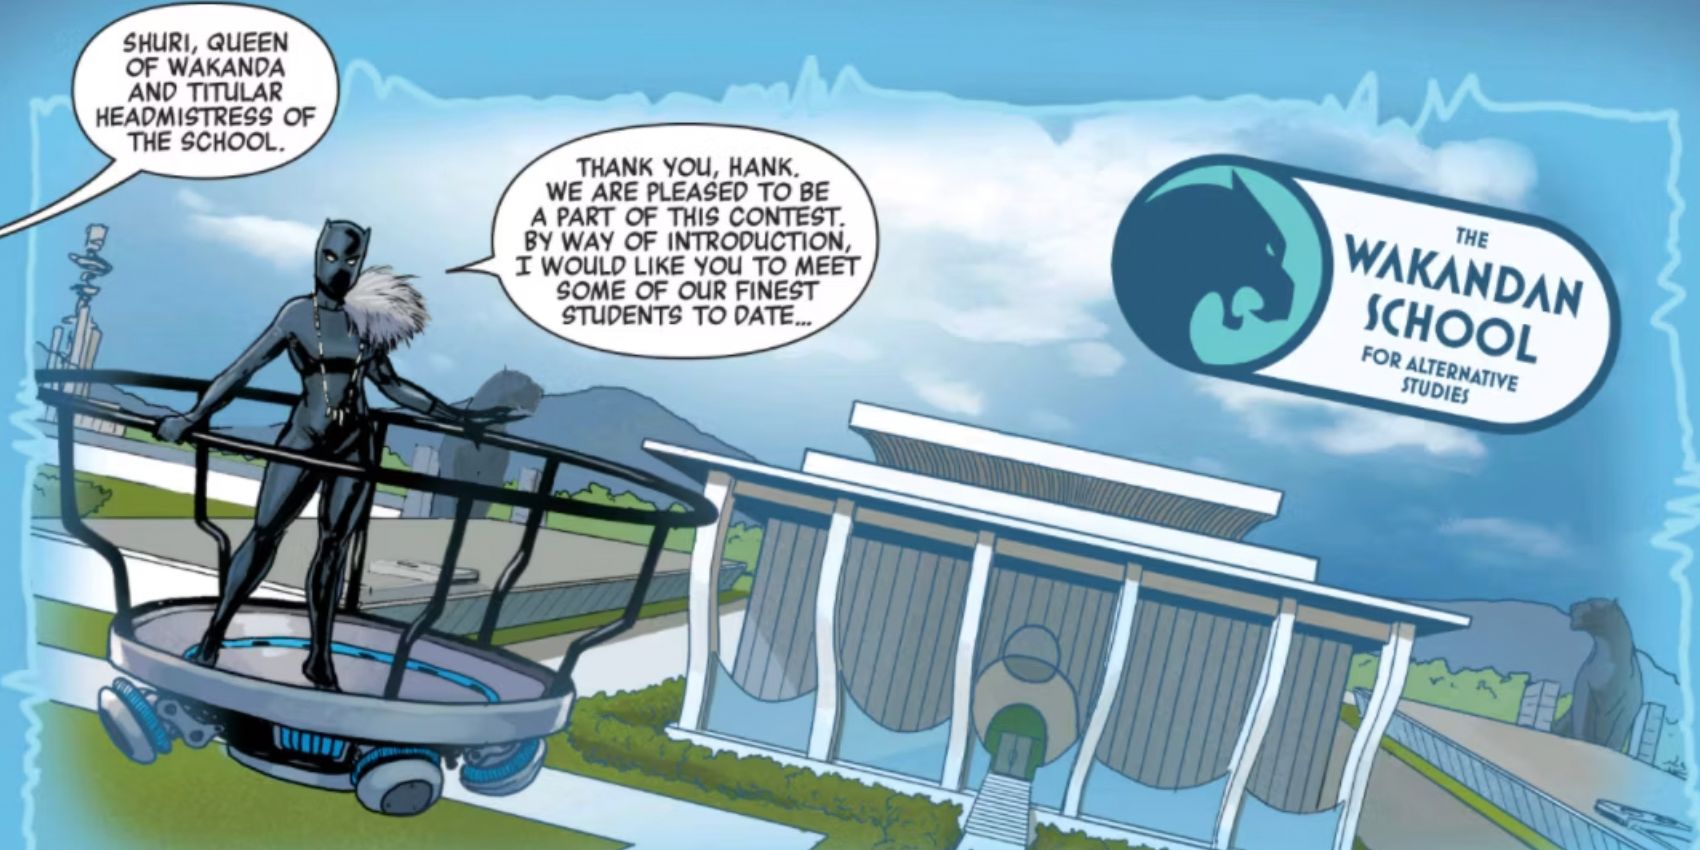 Shuri stands in her Black Panther garb outside the Wakandan School